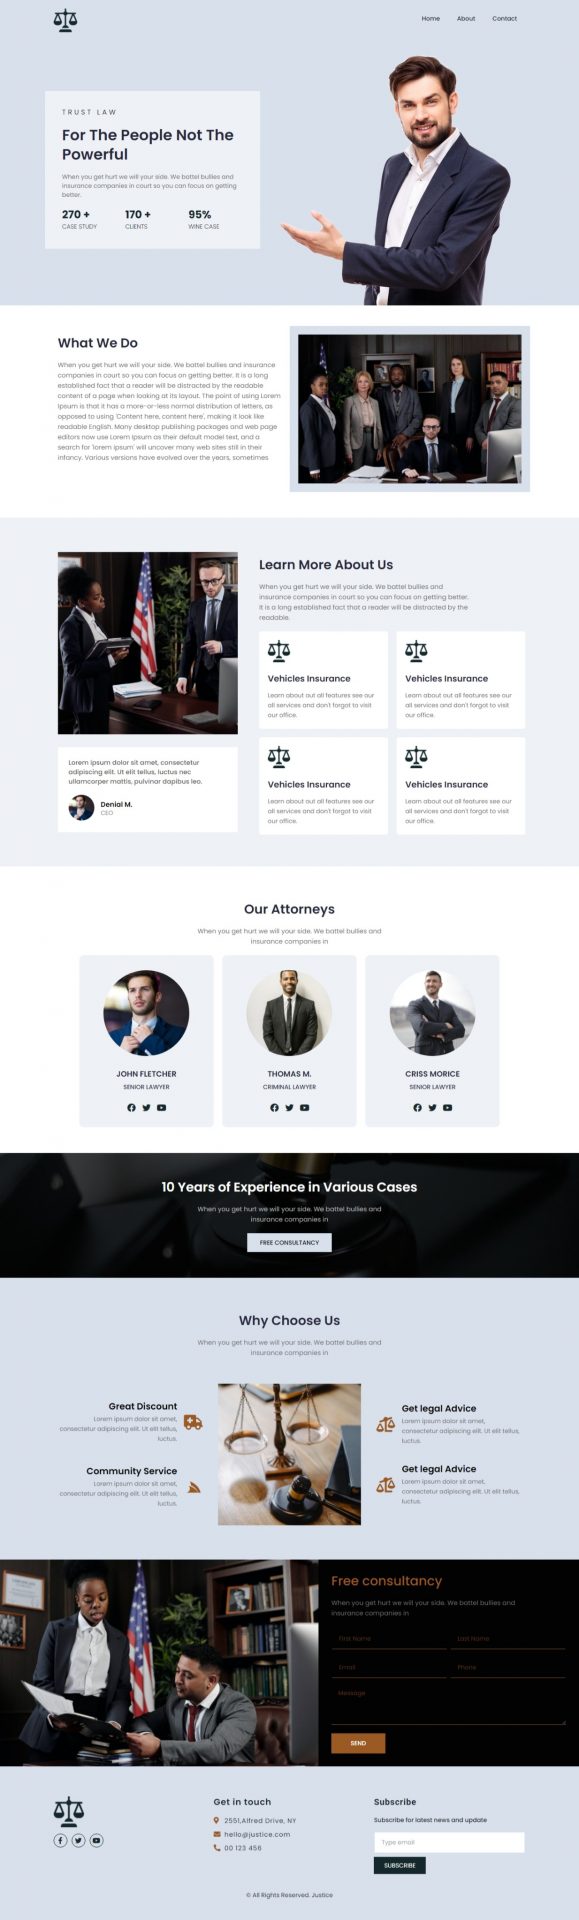 legale-lawyer-law-firm-website-template